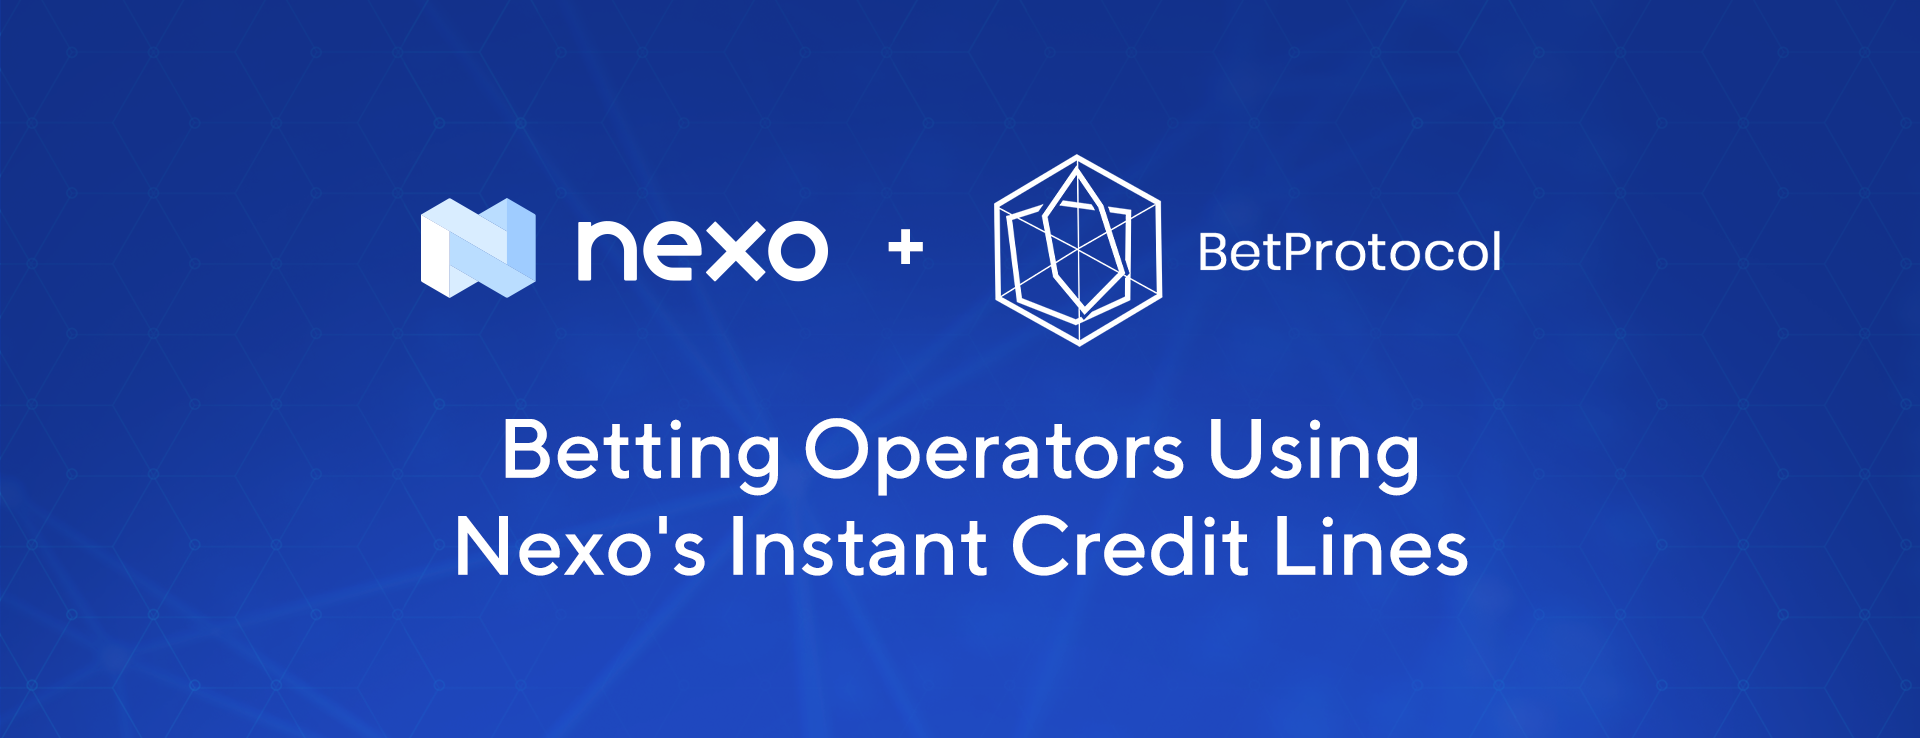 Nexo Partners With BetProtocol to Provide Instant Crypto Credit Lines to Betting Operators